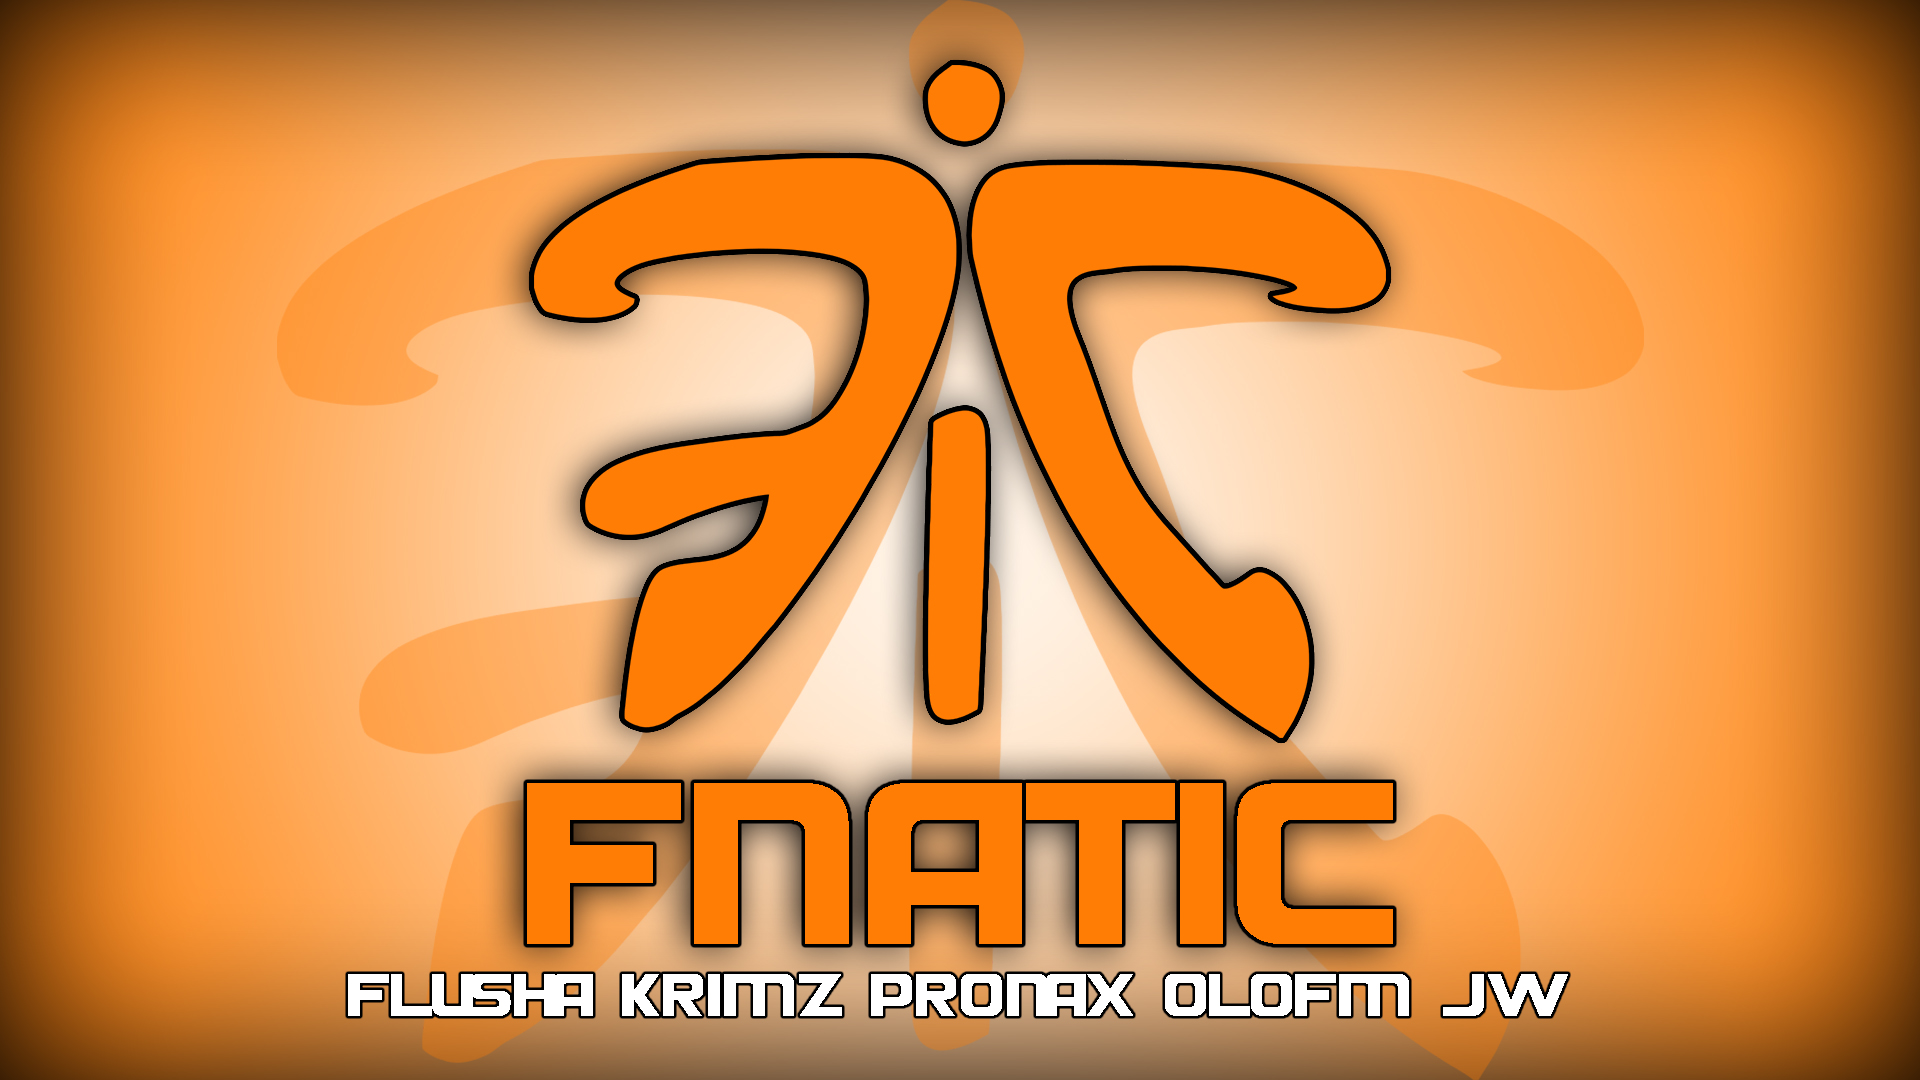 Made A Quick Fnatic Cs Go Wallpaper For Myself Thought Some Of